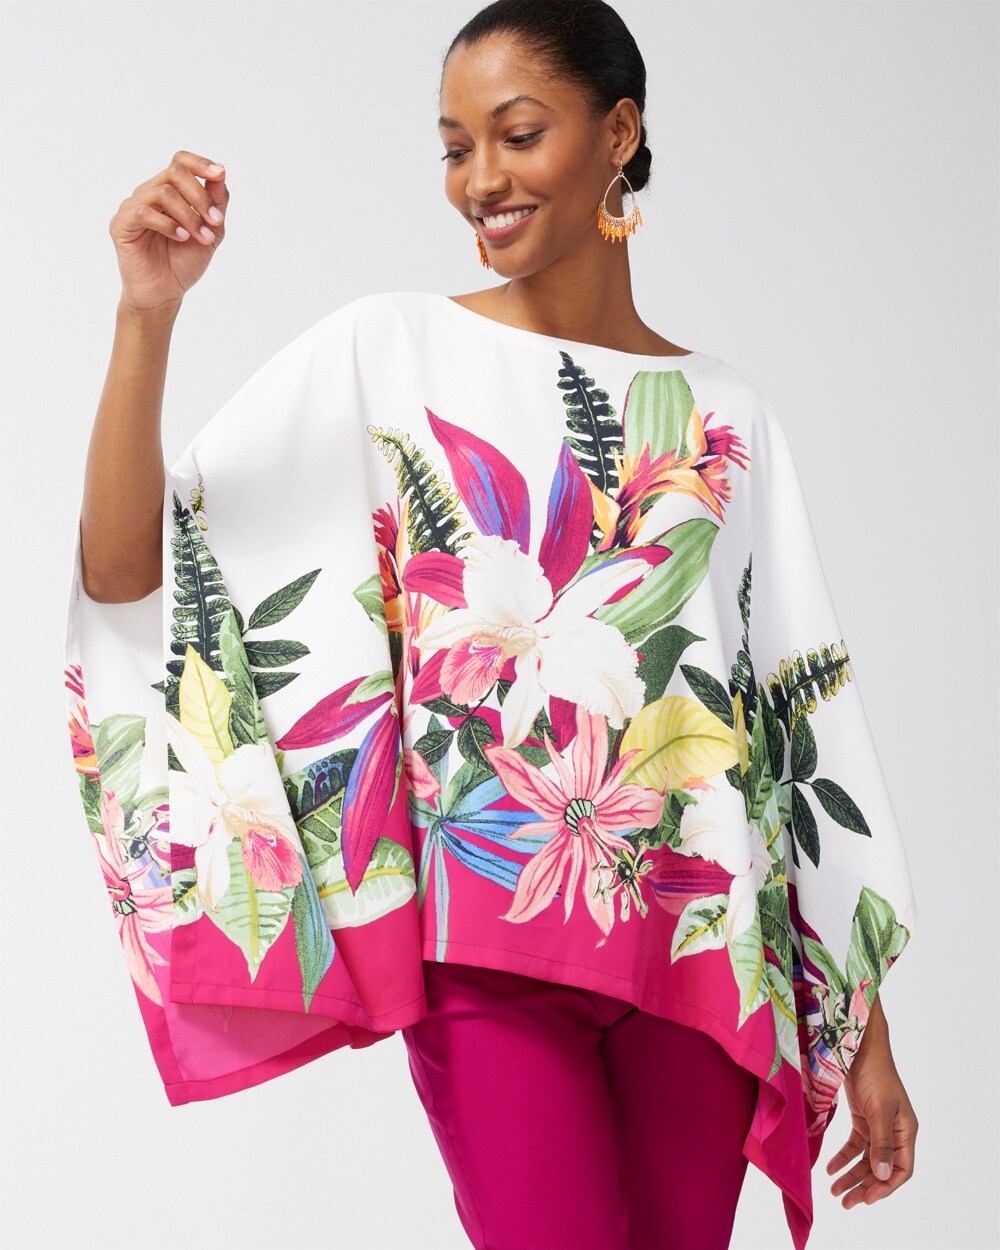 Botanical Print Poncho video preview image, click to start video